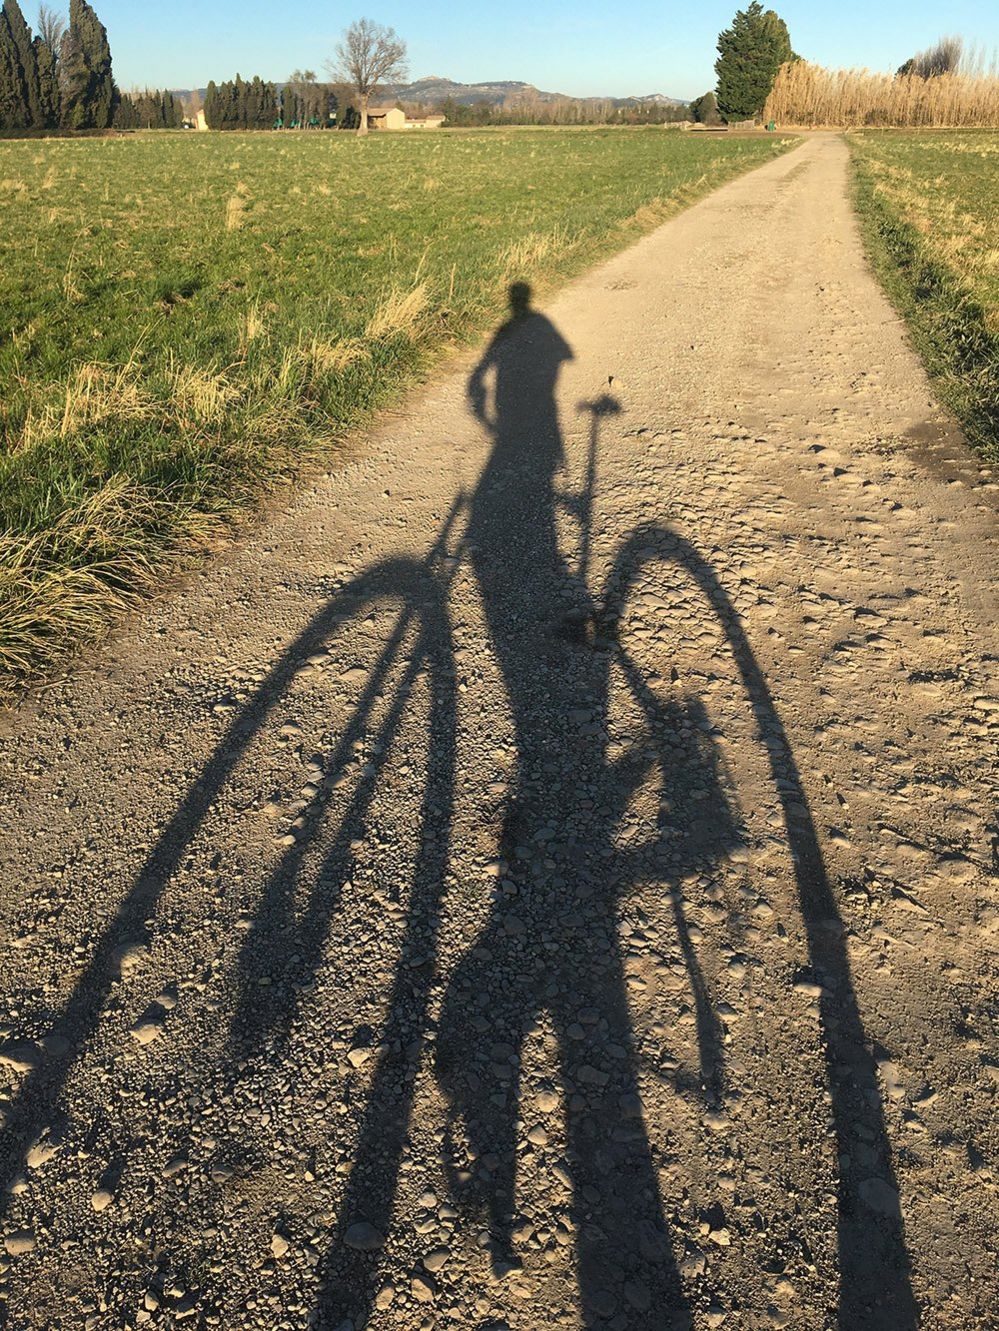 Shadow of a bicycle